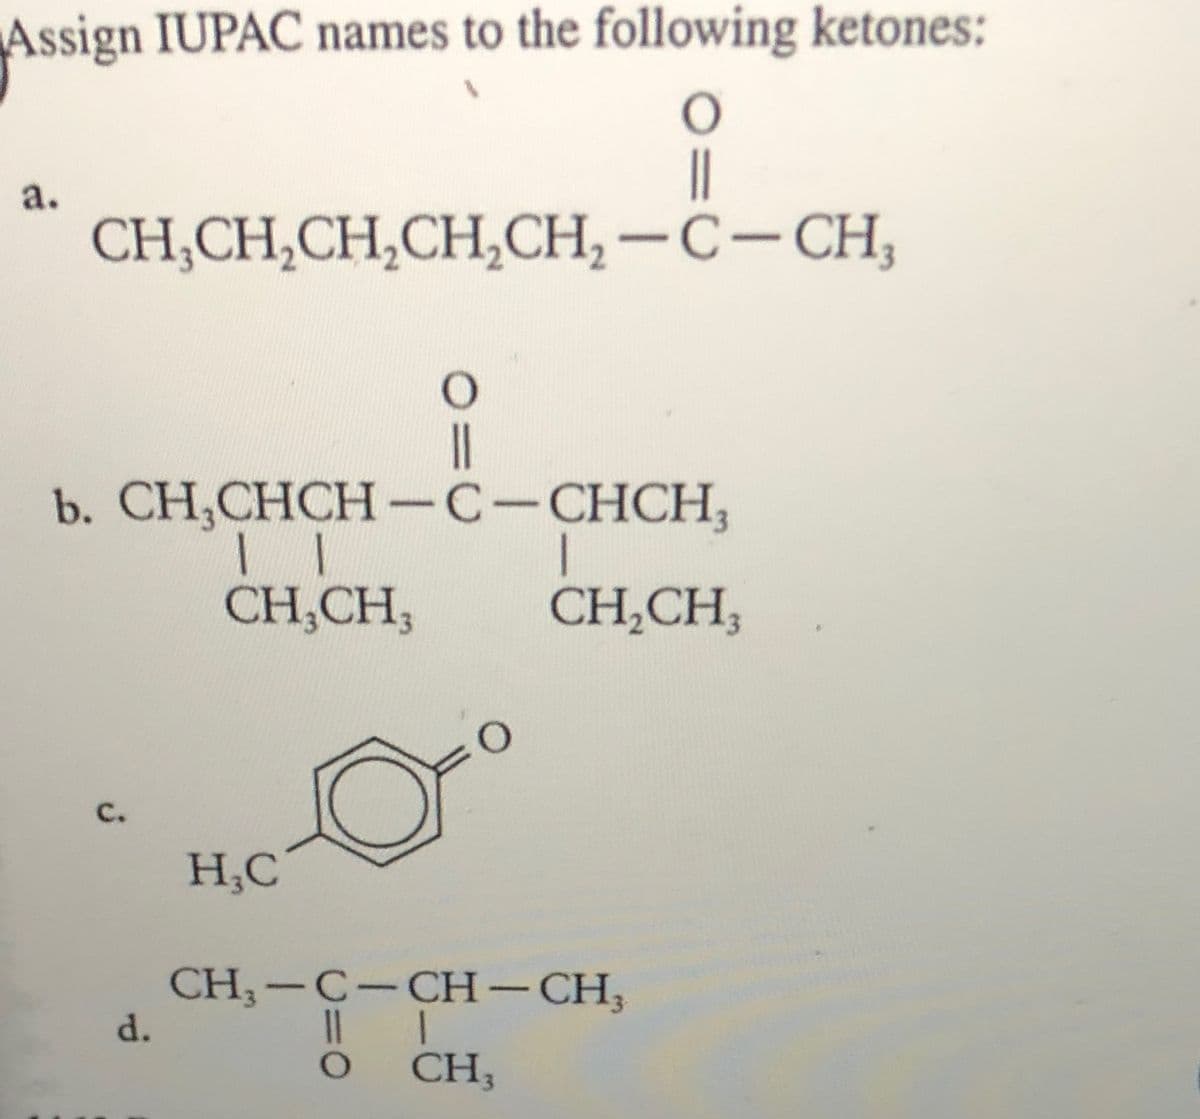 Assign IUPAC names to the following ketones:
||
a.
CH,CH,CH,CH,CH, -C-CH,
||
b. CH,CHCH-C-CHCH,
CH,CH,
CH,CH,
C.
H,C
CH;-C-CH– CH,
一
CH;
d.
